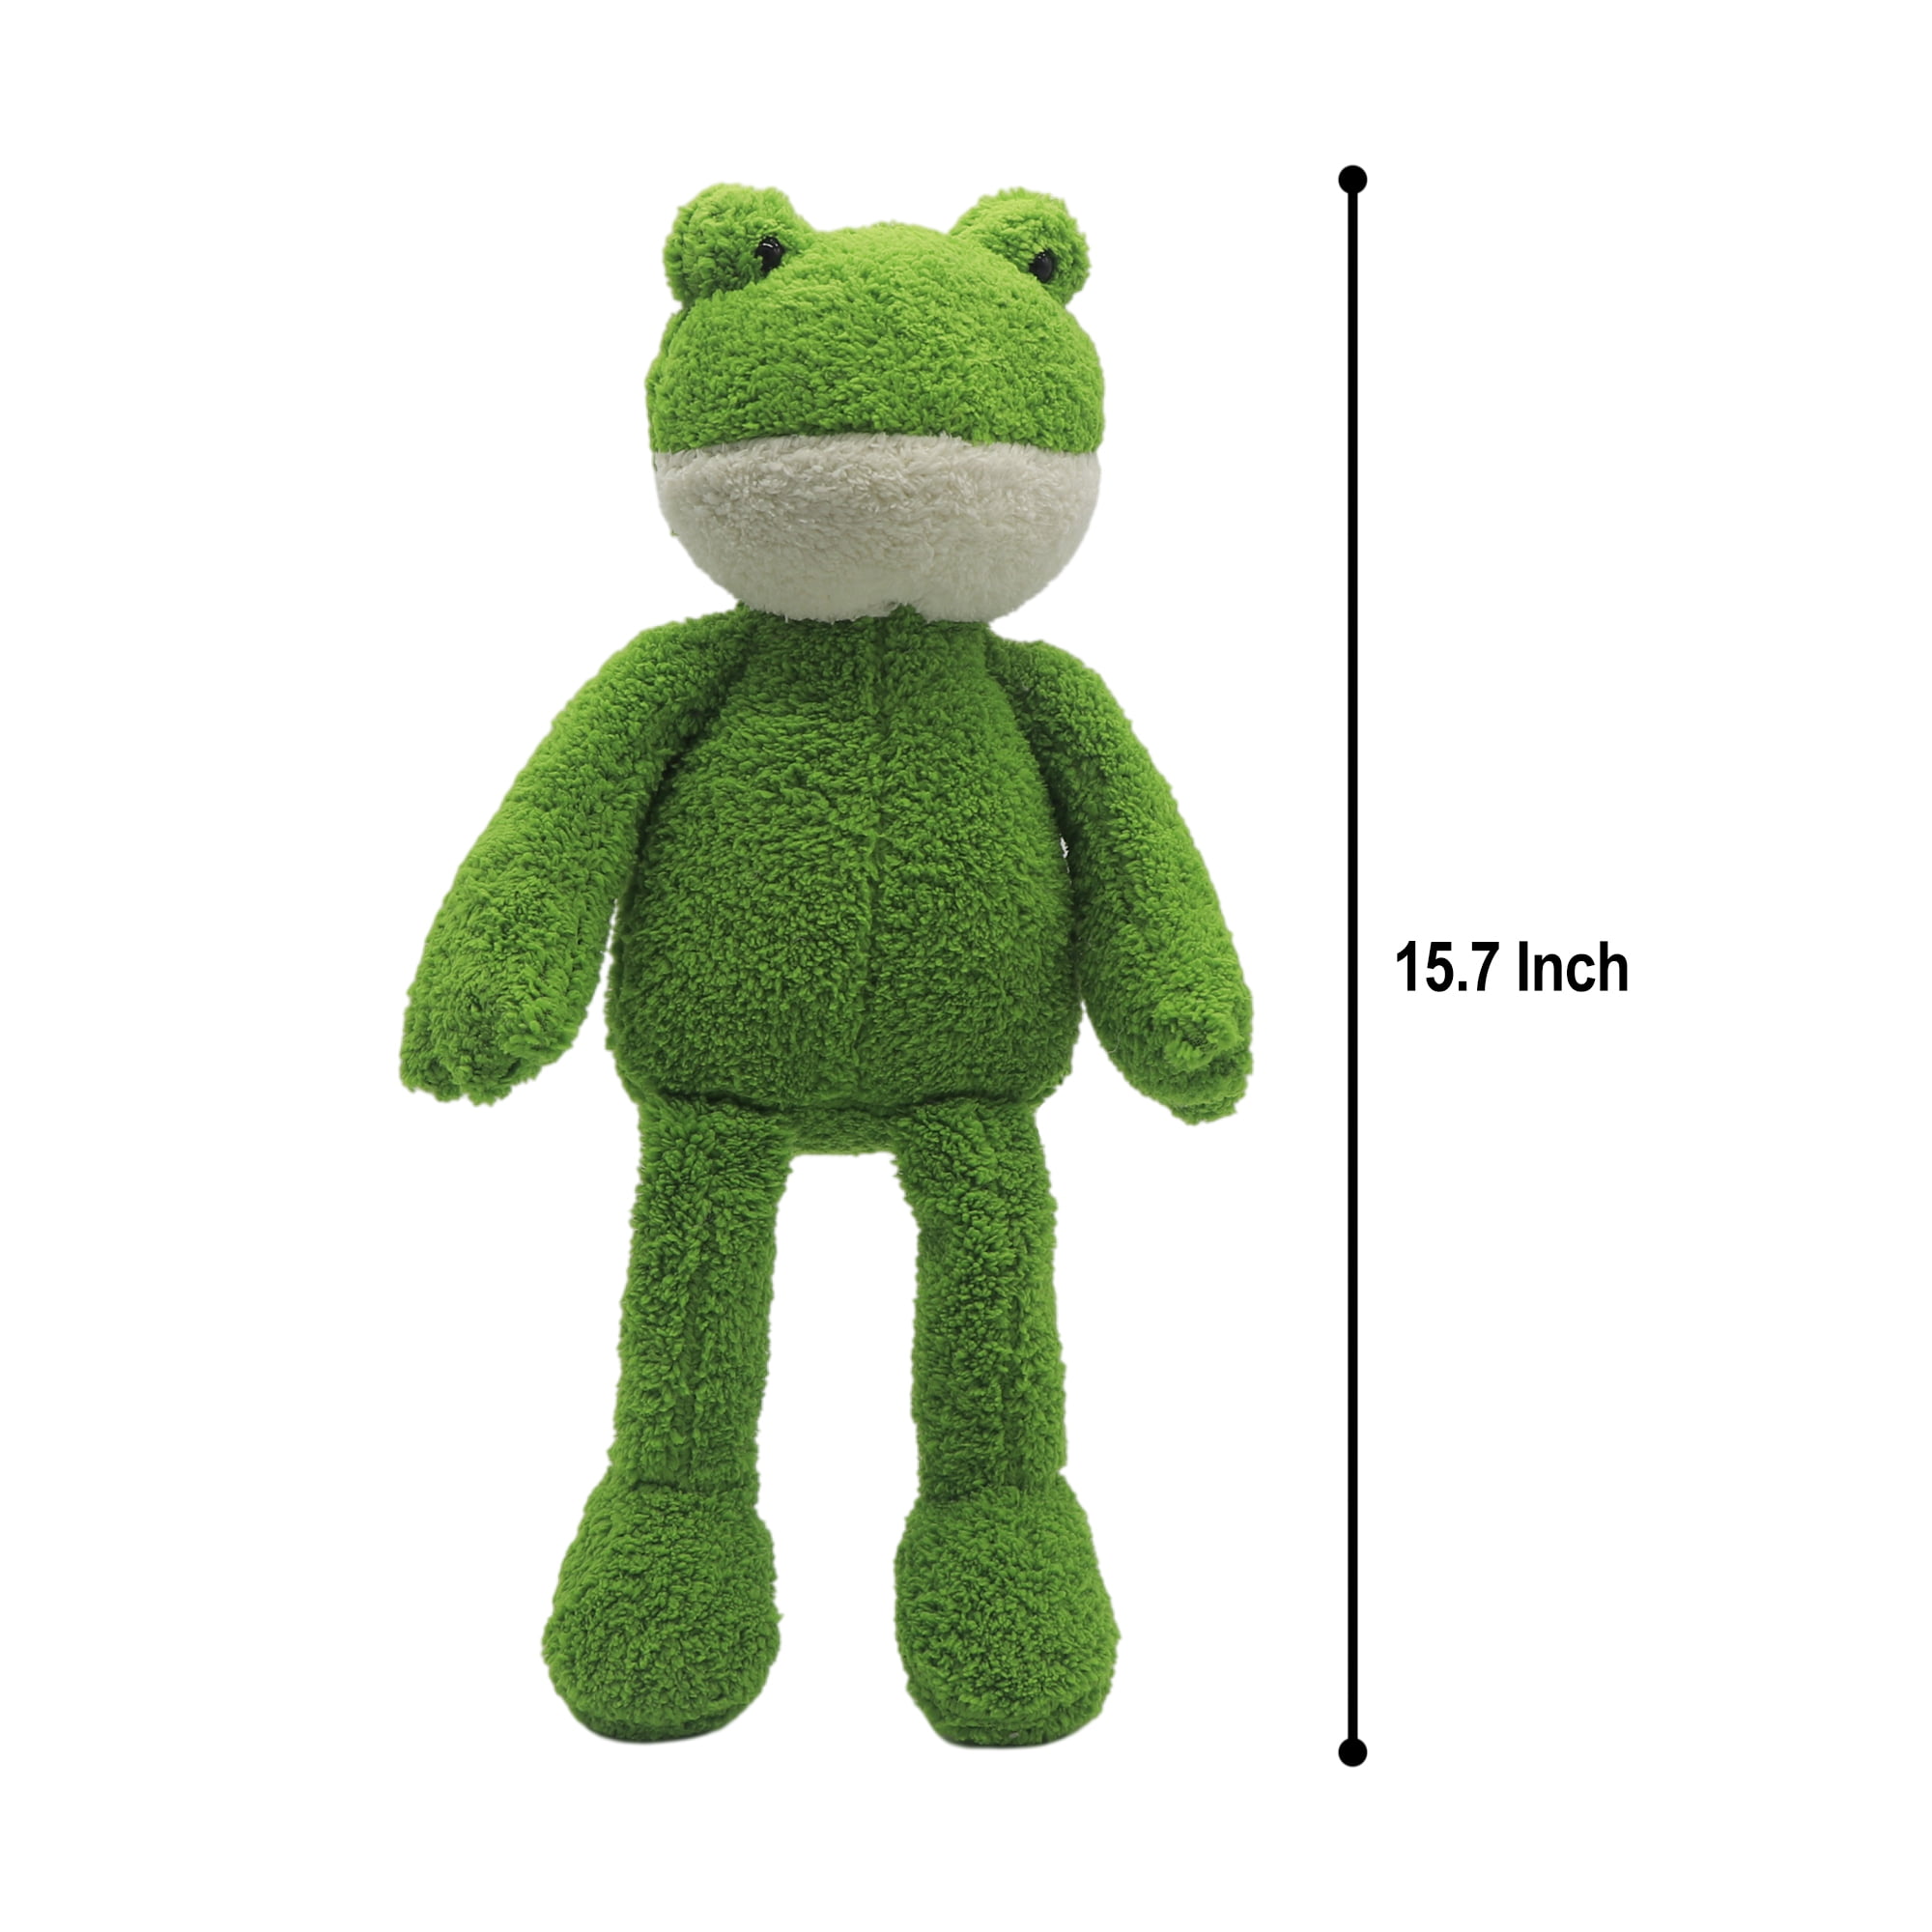 Green Frog Plush Stuffed Animal, Soft Long-leg Frog Plush Doll Toys, Super Cute  Frog Toy Christmas Birthday Gifts for Boys Girls Kids Toddlers Children, Fluffy  Stuffed Frog Plushie Decoration, 15.7 